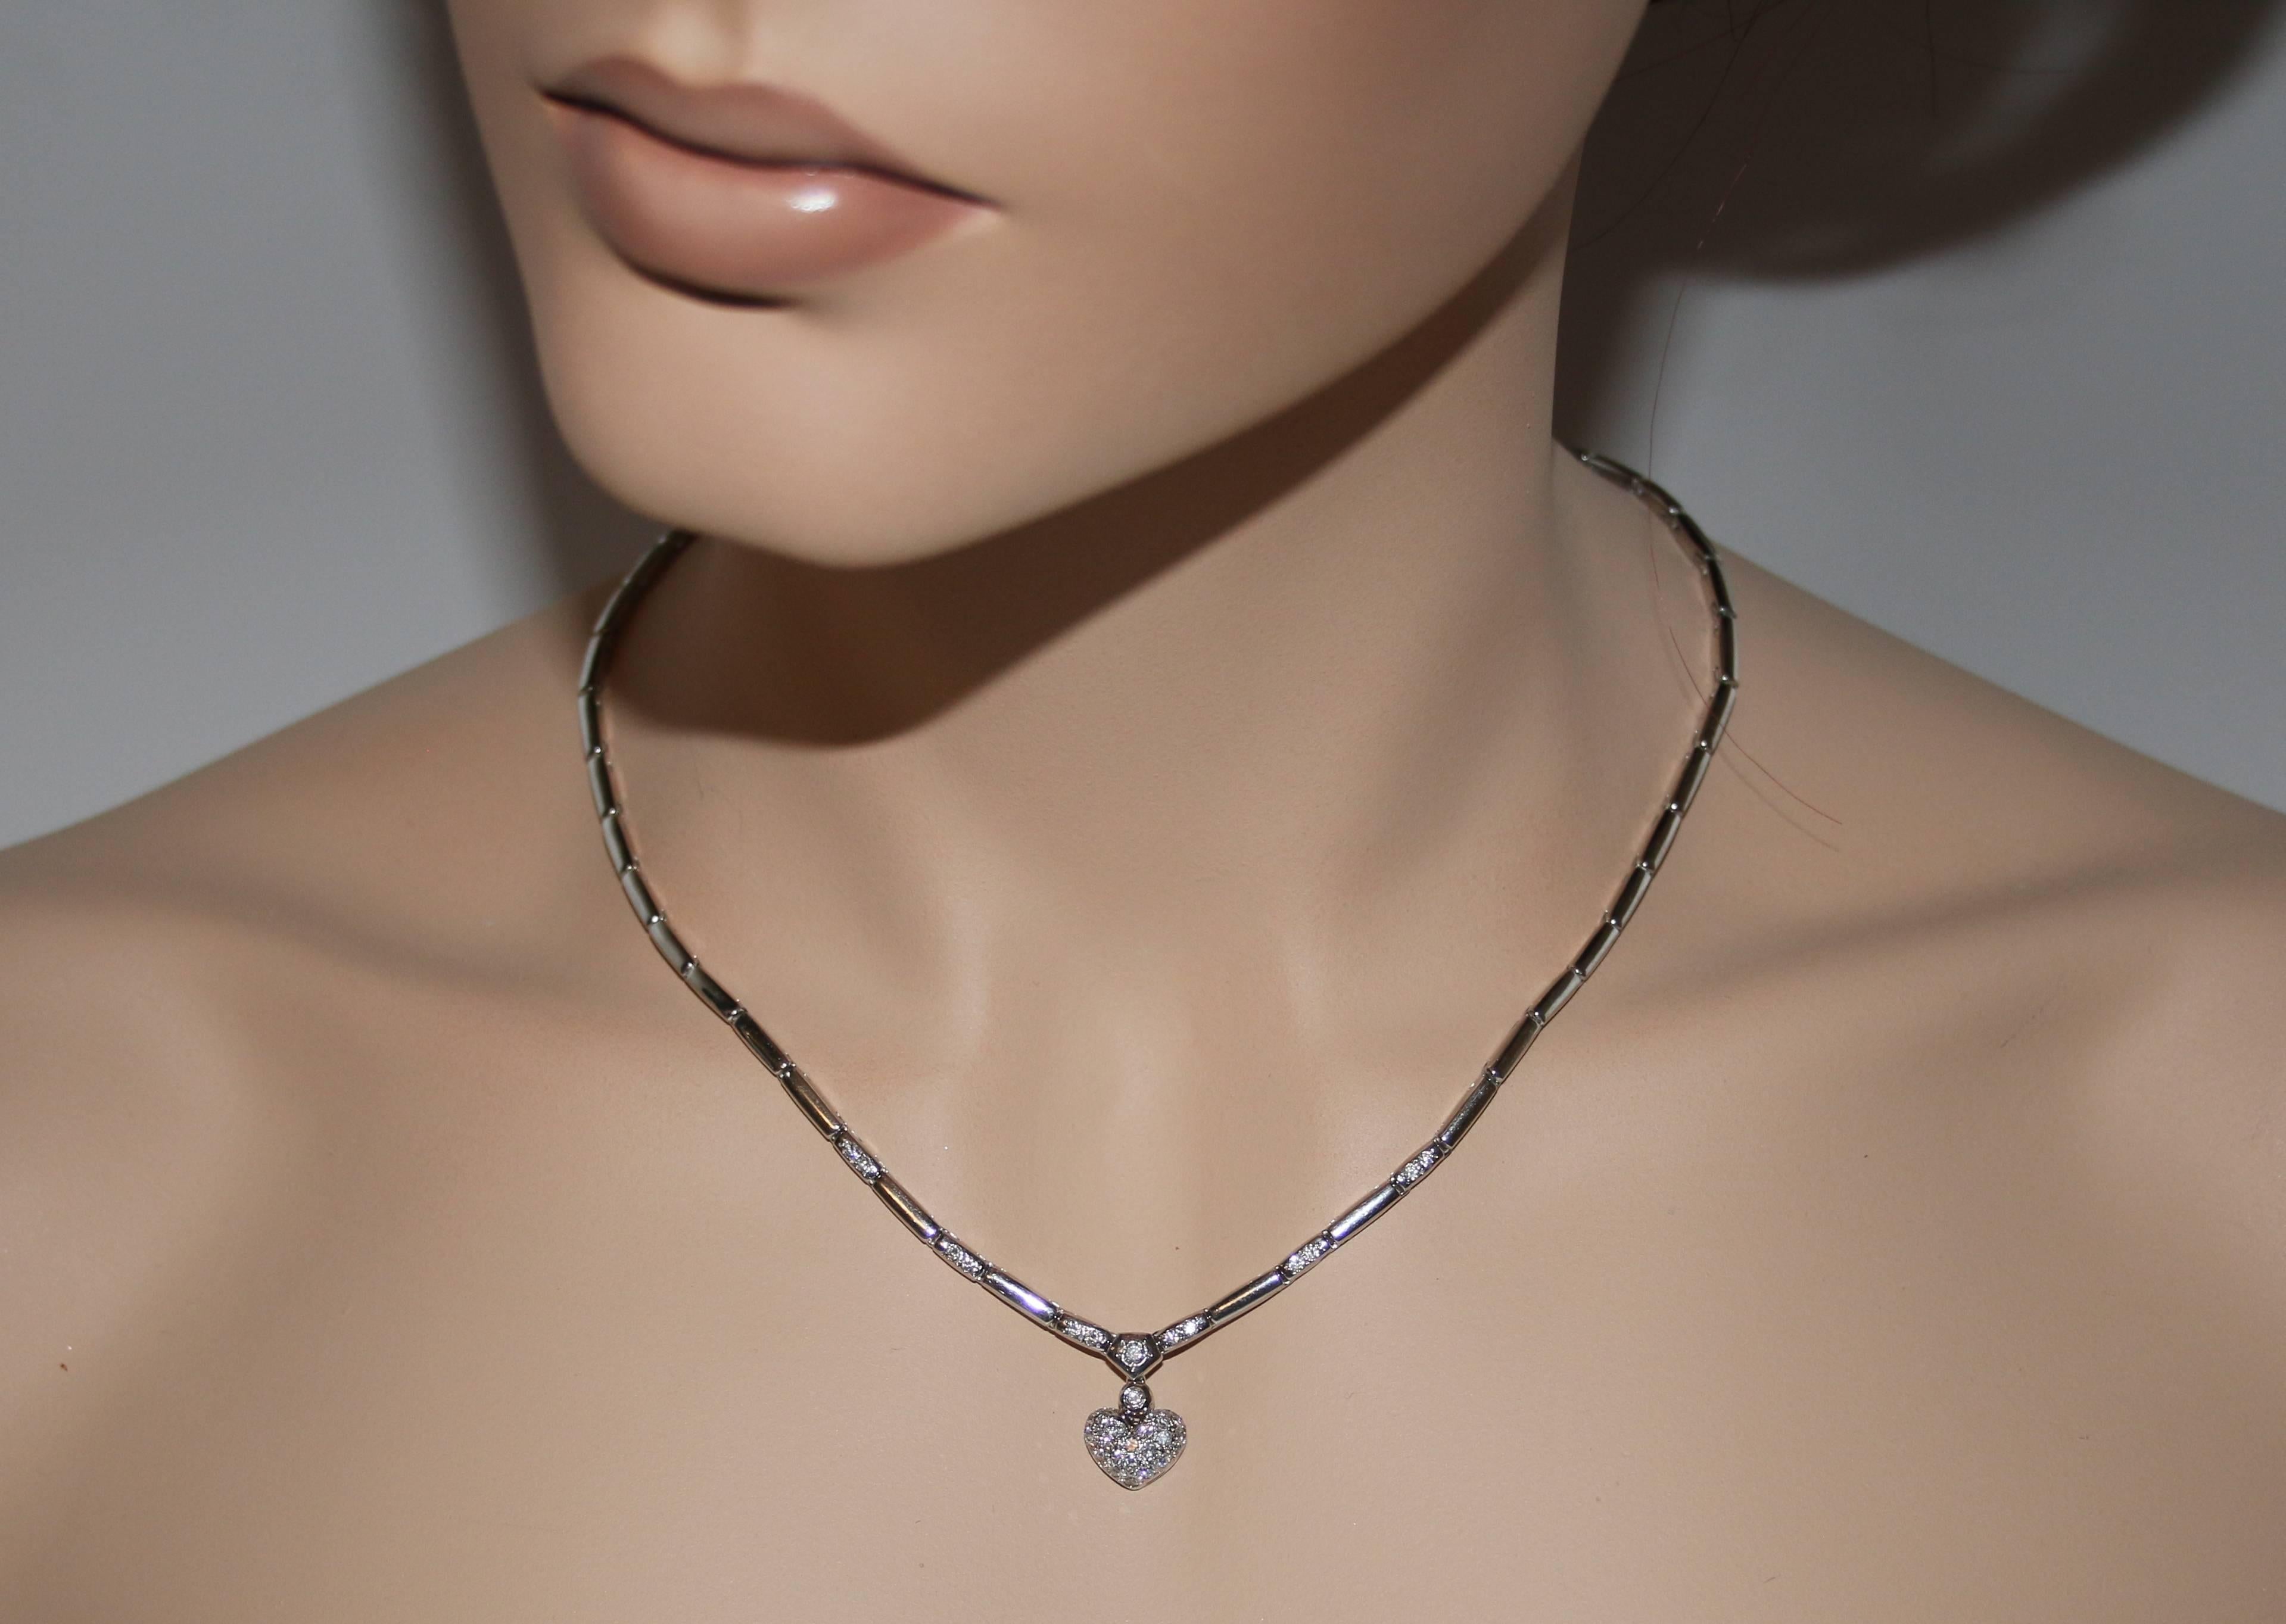 Very Fun Necklace
The necklace is 18K White Gold
There are 0.77 Carat G/H VS Diamonds
The necklace is 17